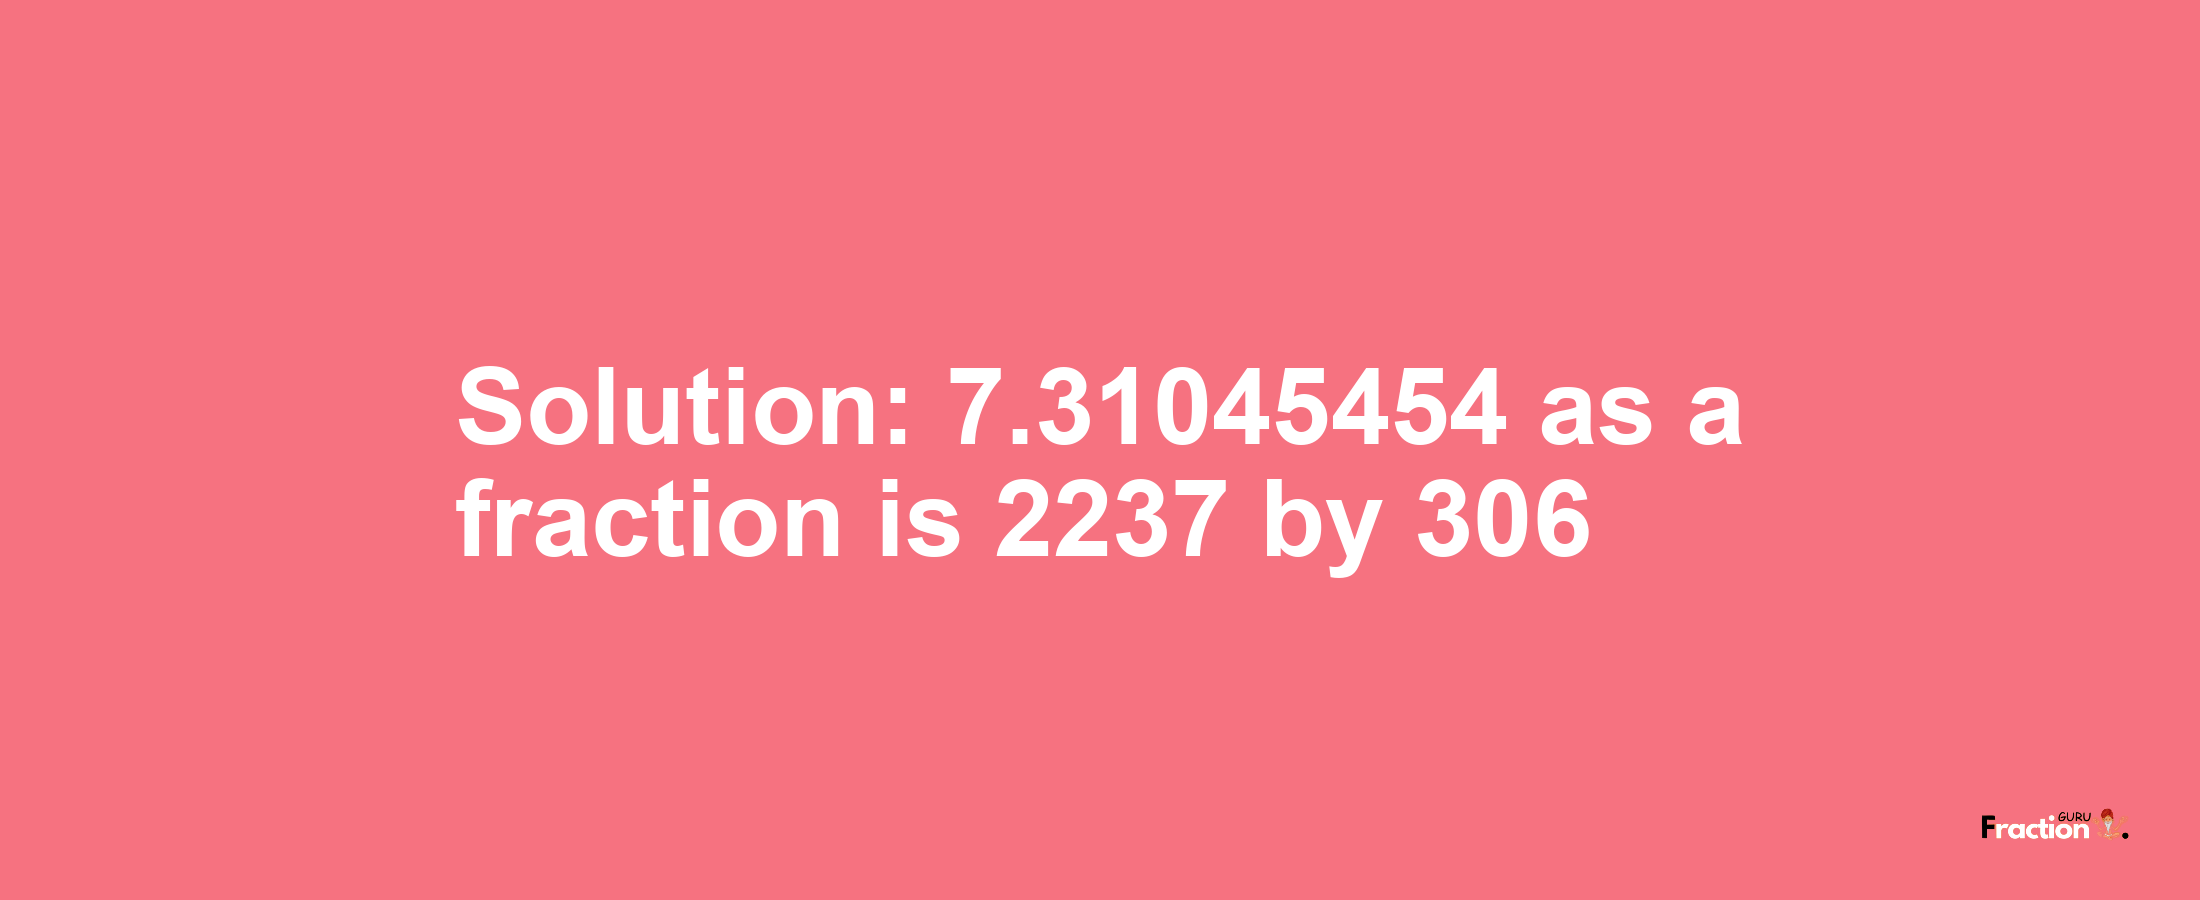 Solution:7.31045454 as a fraction is 2237/306